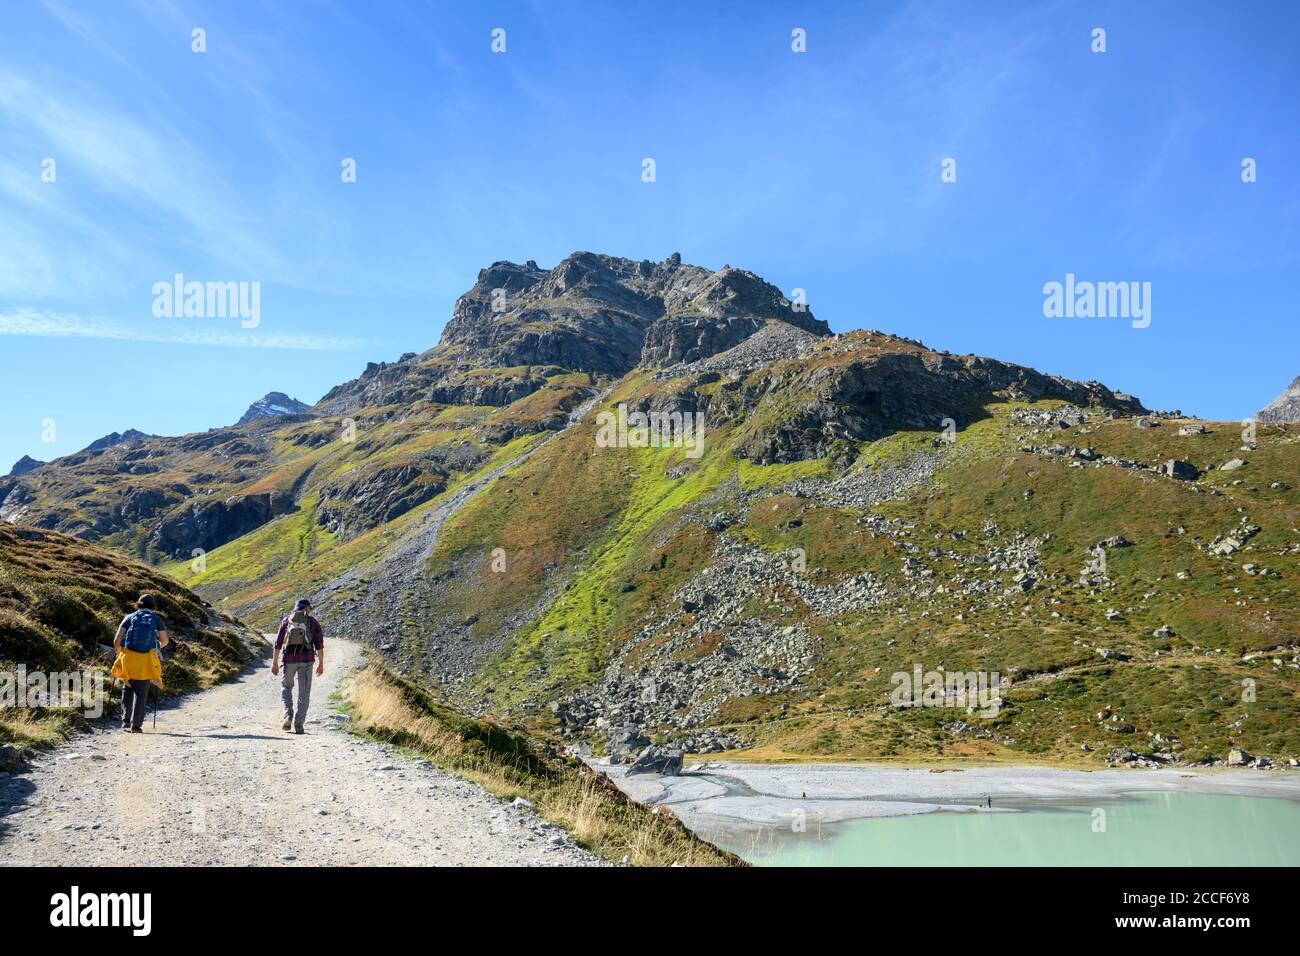 Austria, Montafon, hikers at Lake Silvretta, in the background the Kleine Schattenspitze, 2703 m above sea level Stock Photo